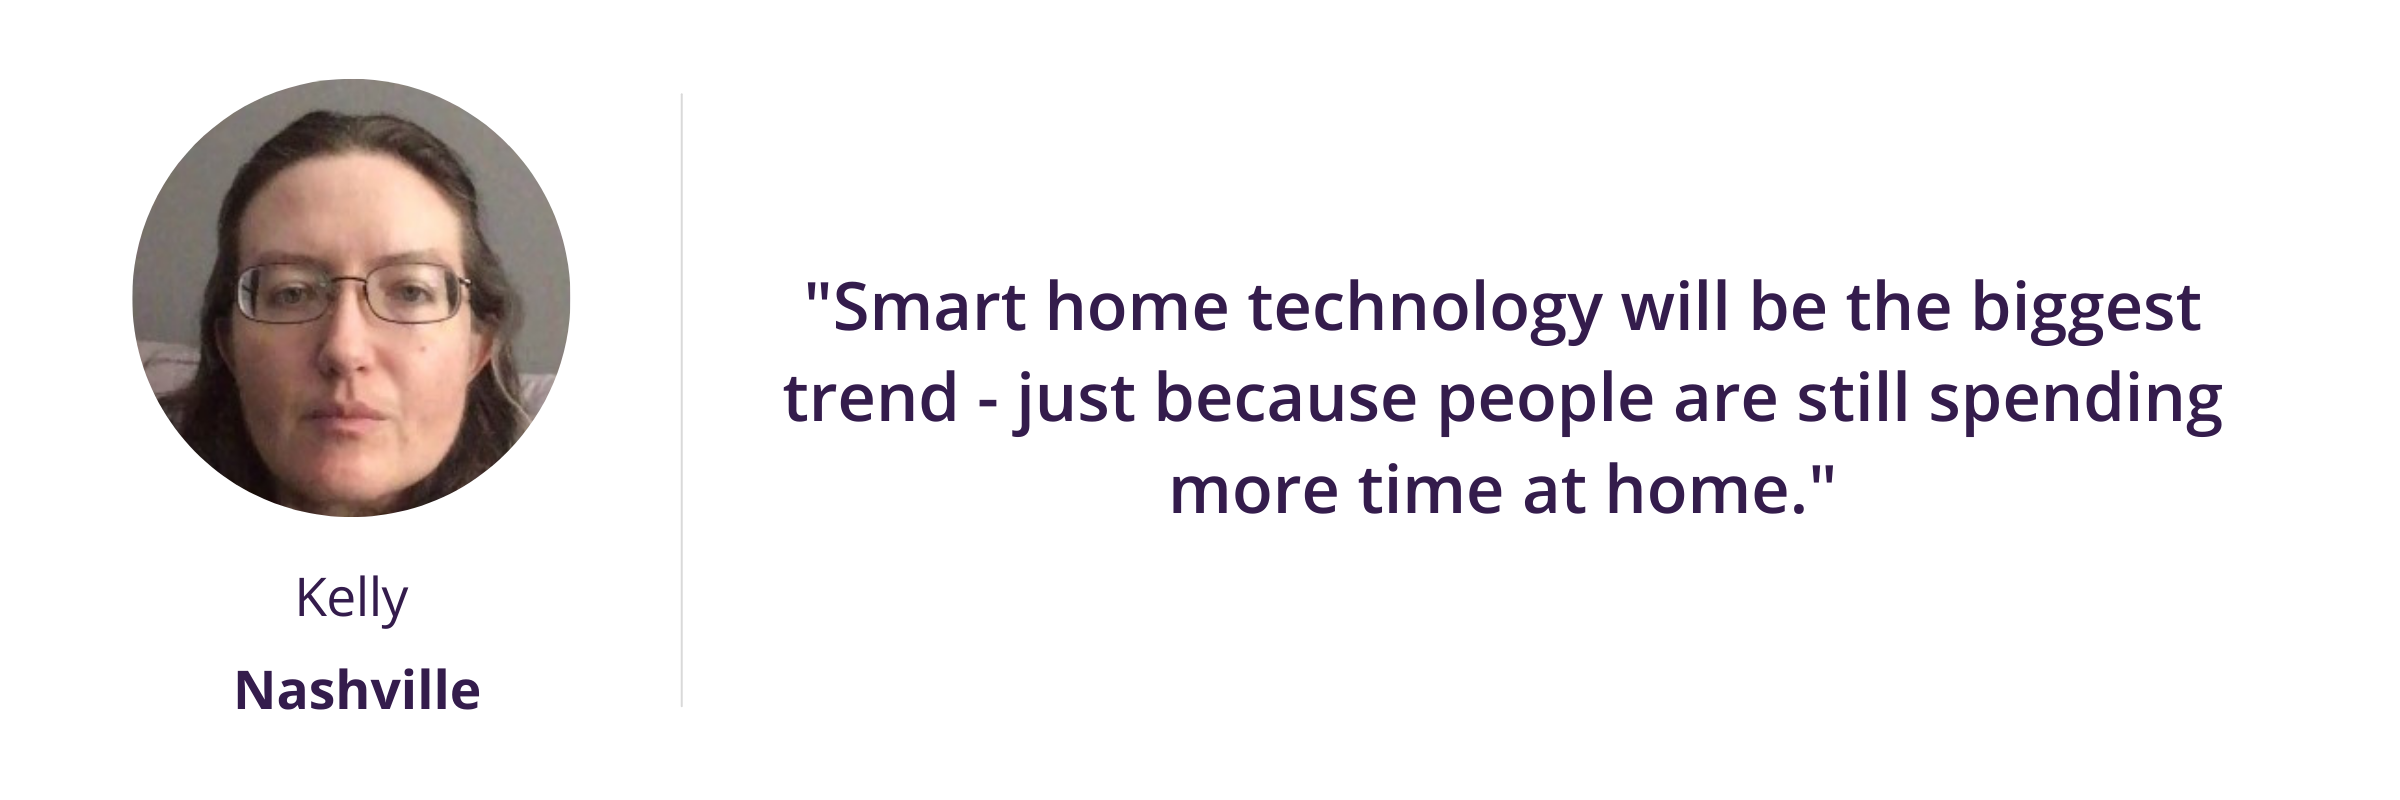 Smart home technology will be the biggest trend - just because people are still spending more time at home.